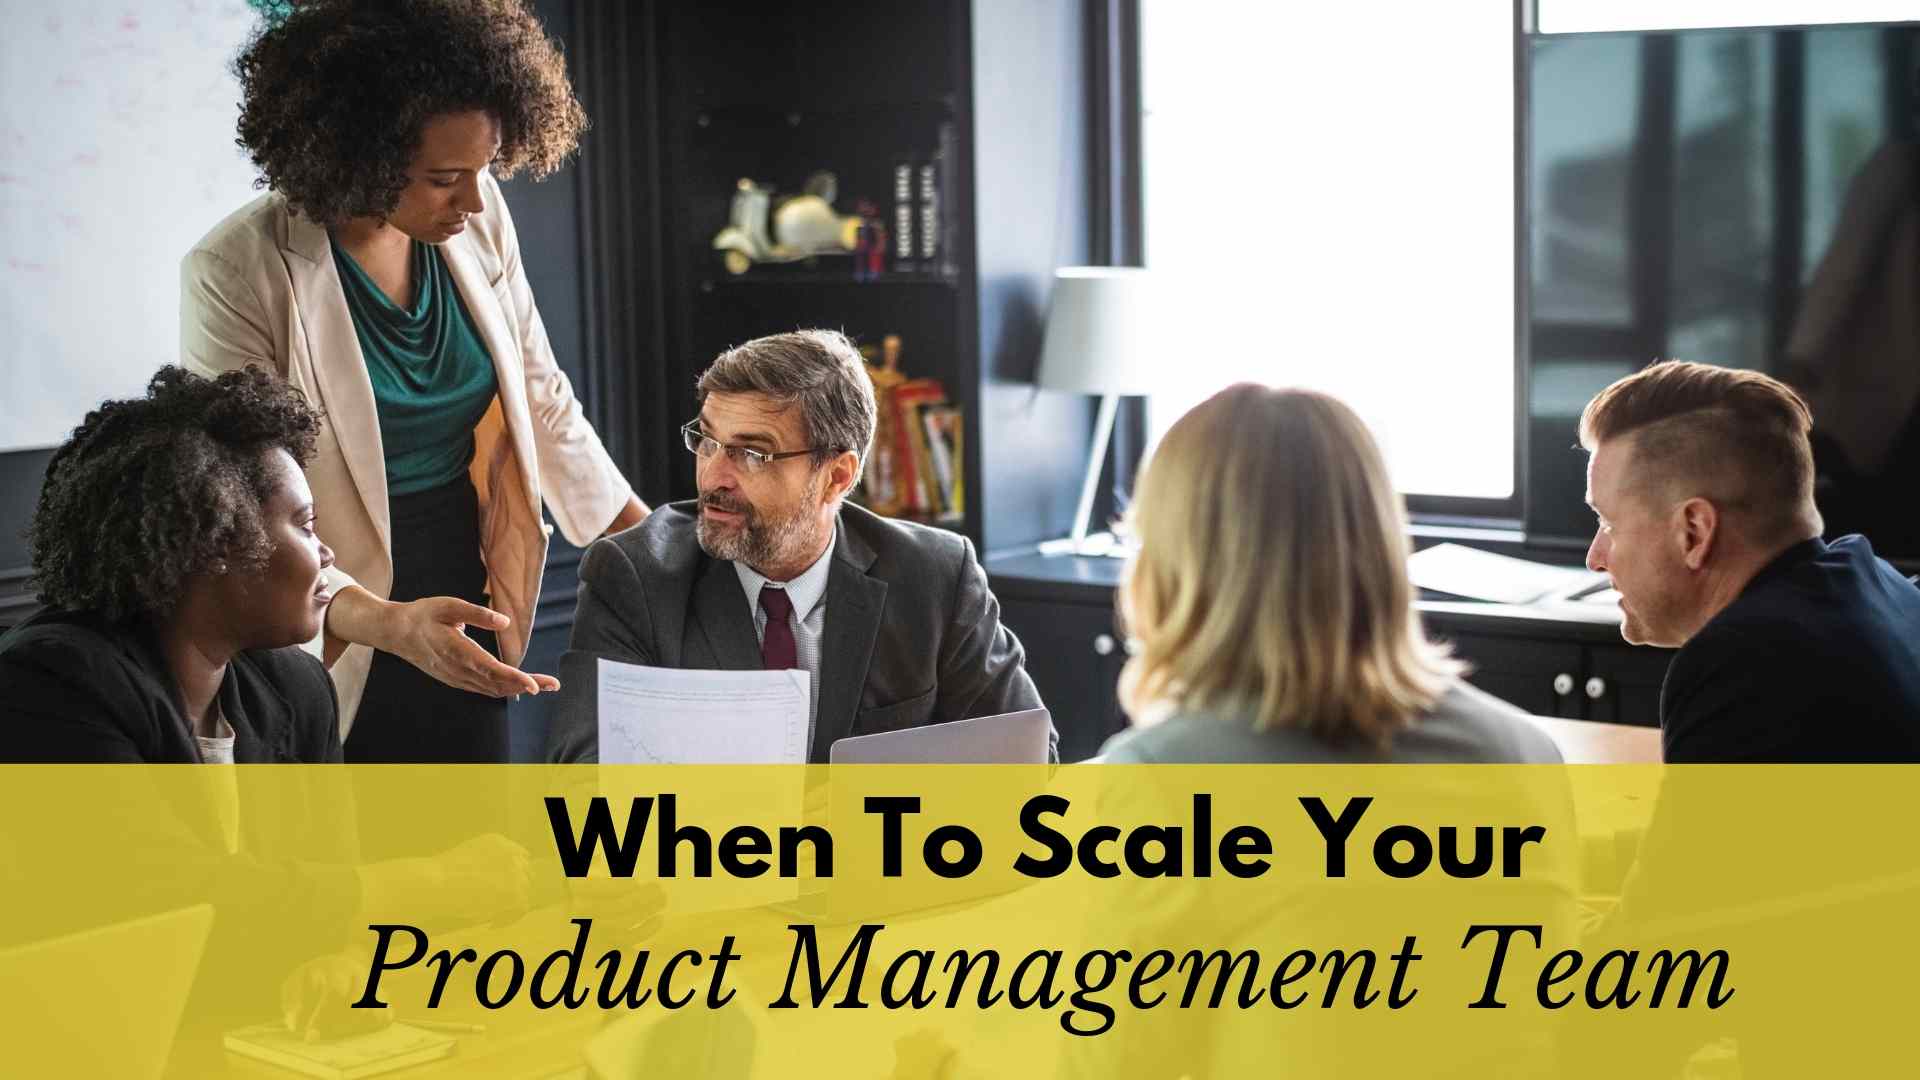 When To Scale Your Product Management Team